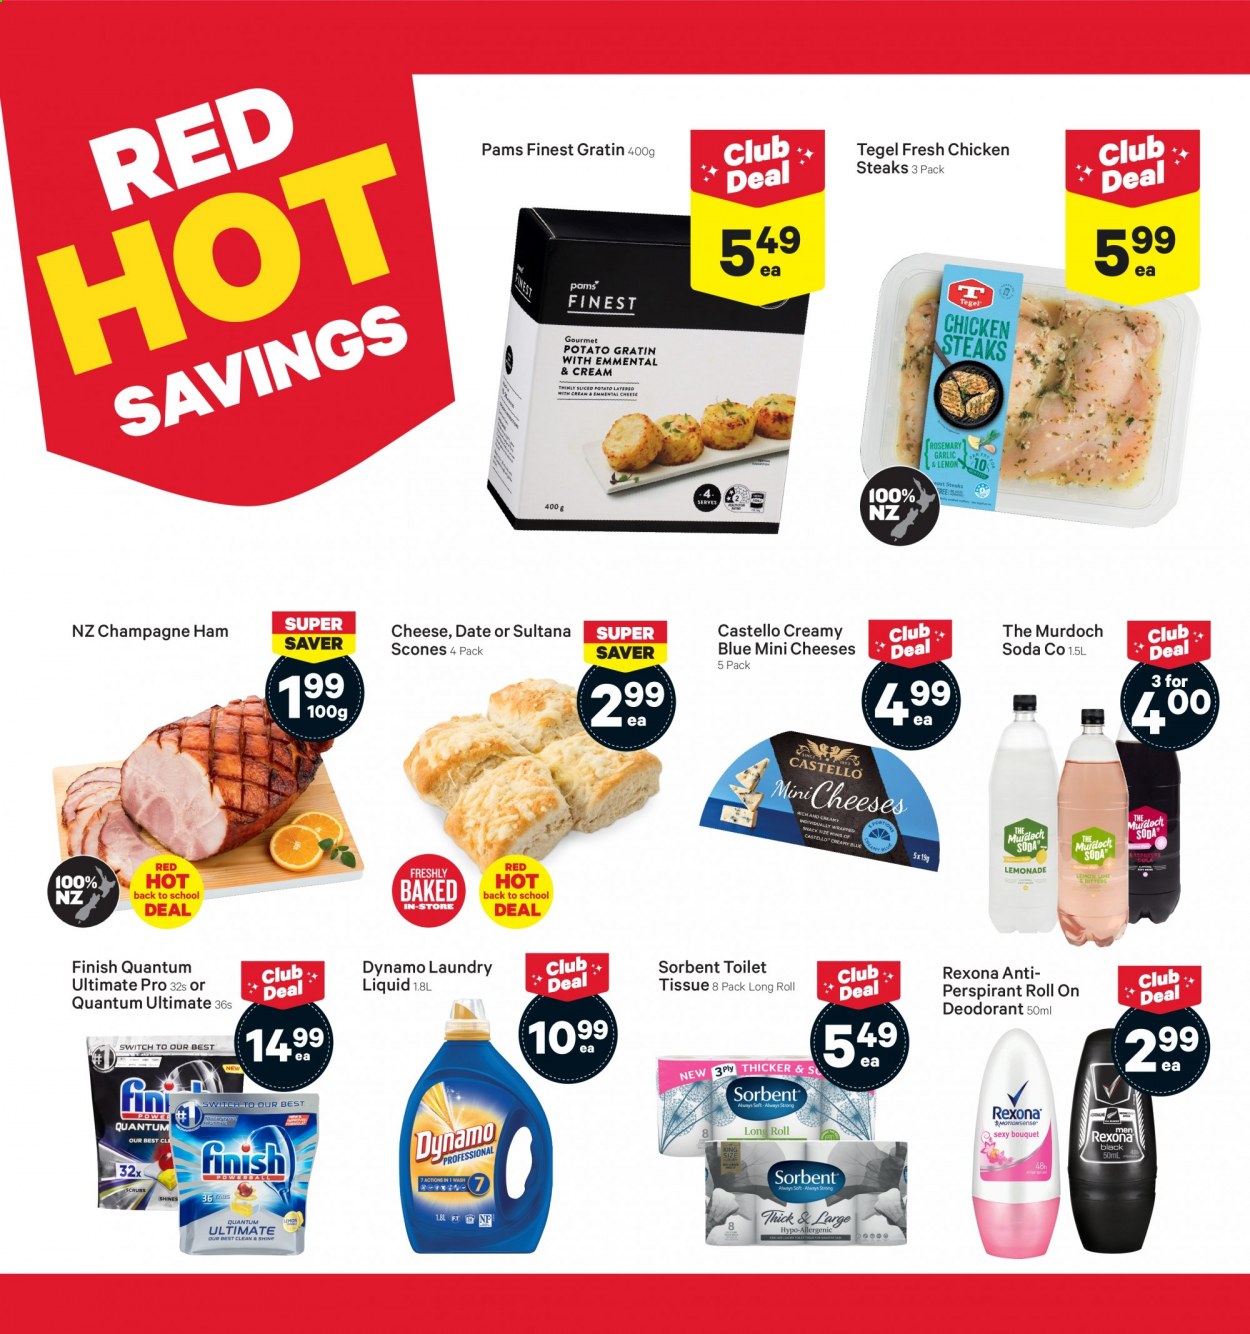 thumbnail - New World mailer - 18.01.2021 - 24.01.2021 - Sales products - ham, cheese, snack, rosemary, lemonade, soda, champagne, steak, toilet paper, tissues, anti-perspirant, Rexona, roll-on, deodorant, laundry detergent. Page 3.